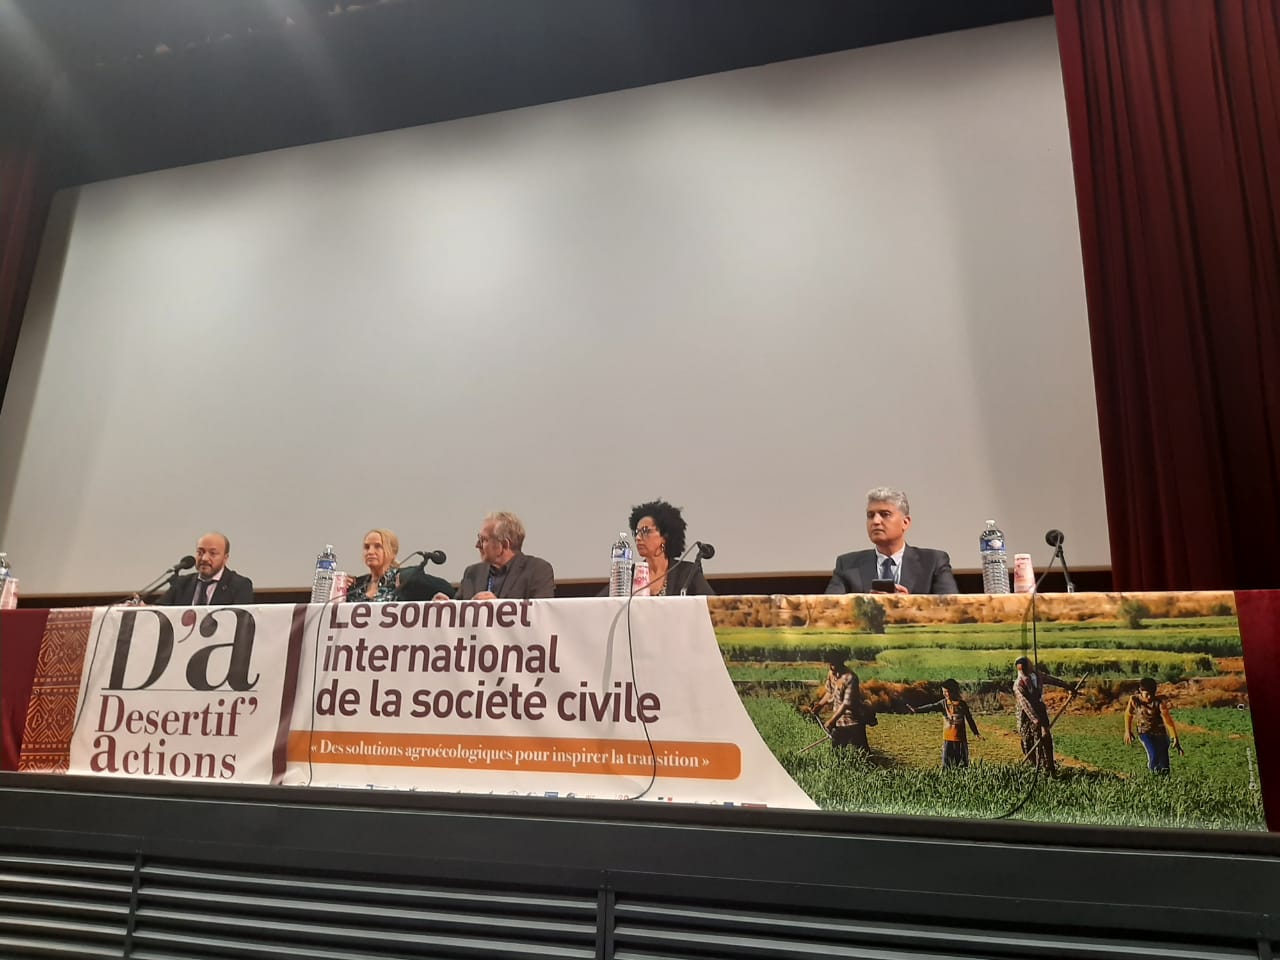 5th Desertif’Actions summit on agroecology